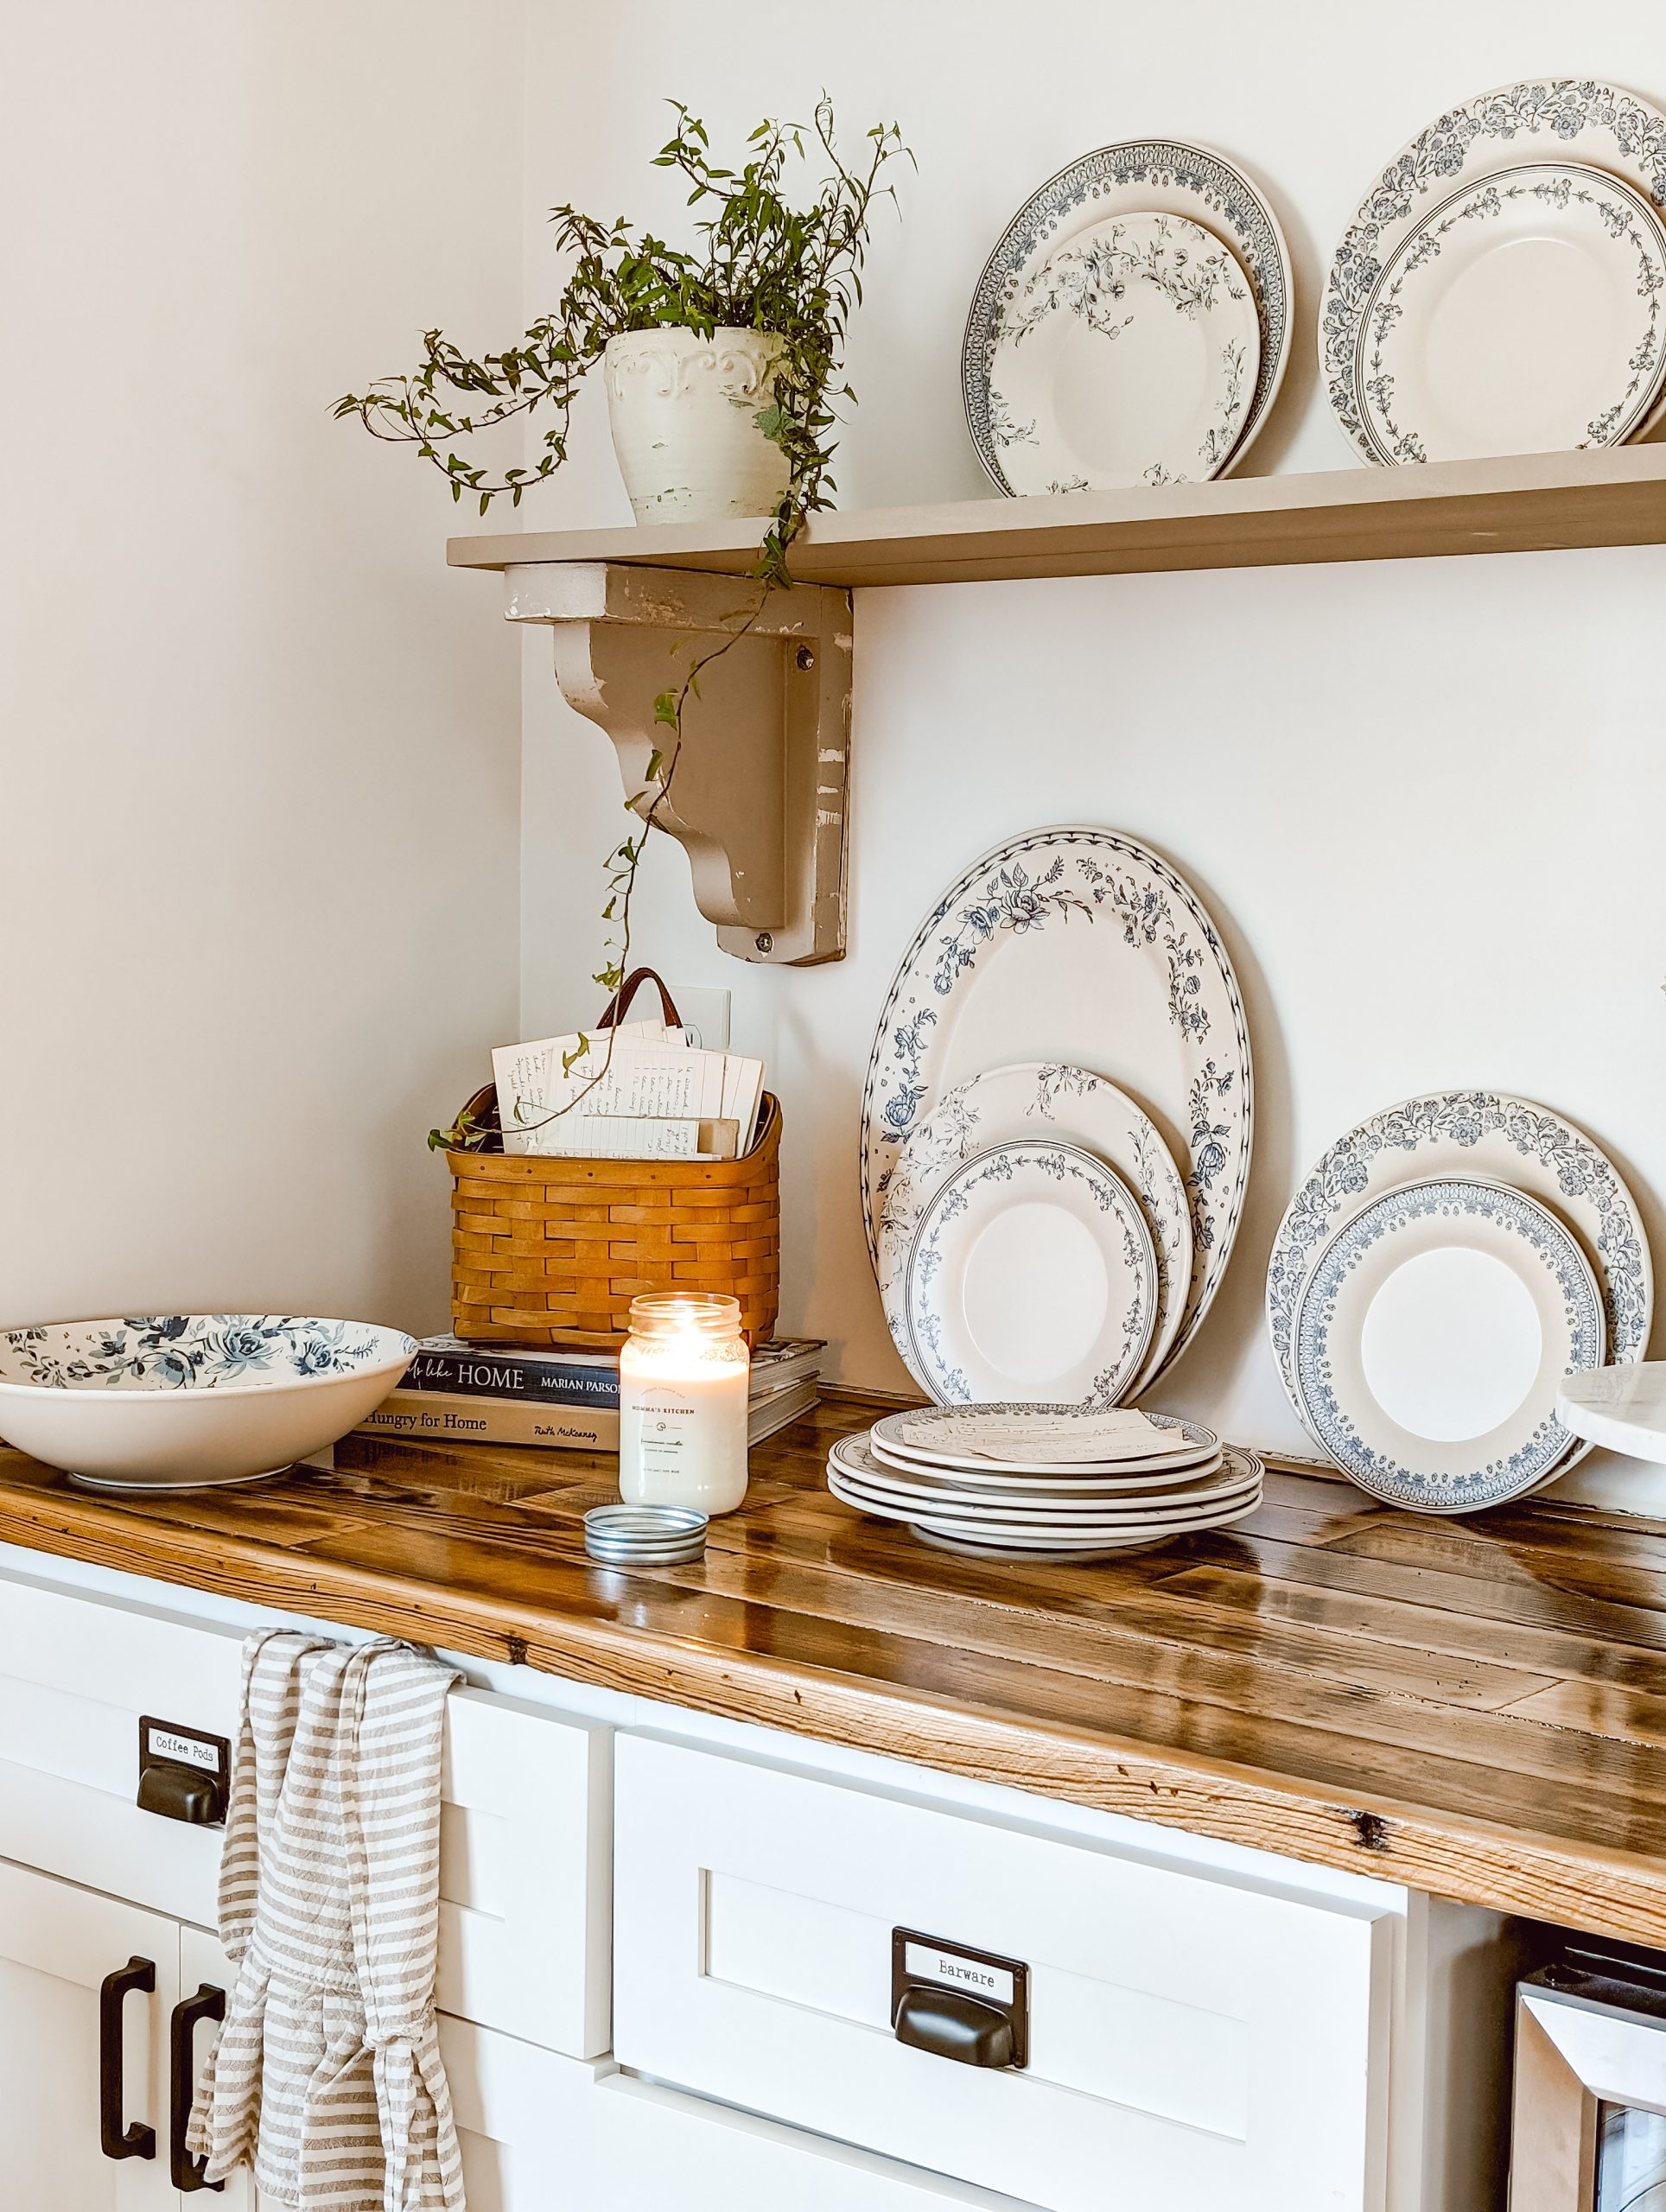 Studio McGee floral melamine dish collection from Target styled in our cottage farmhouse kitchen